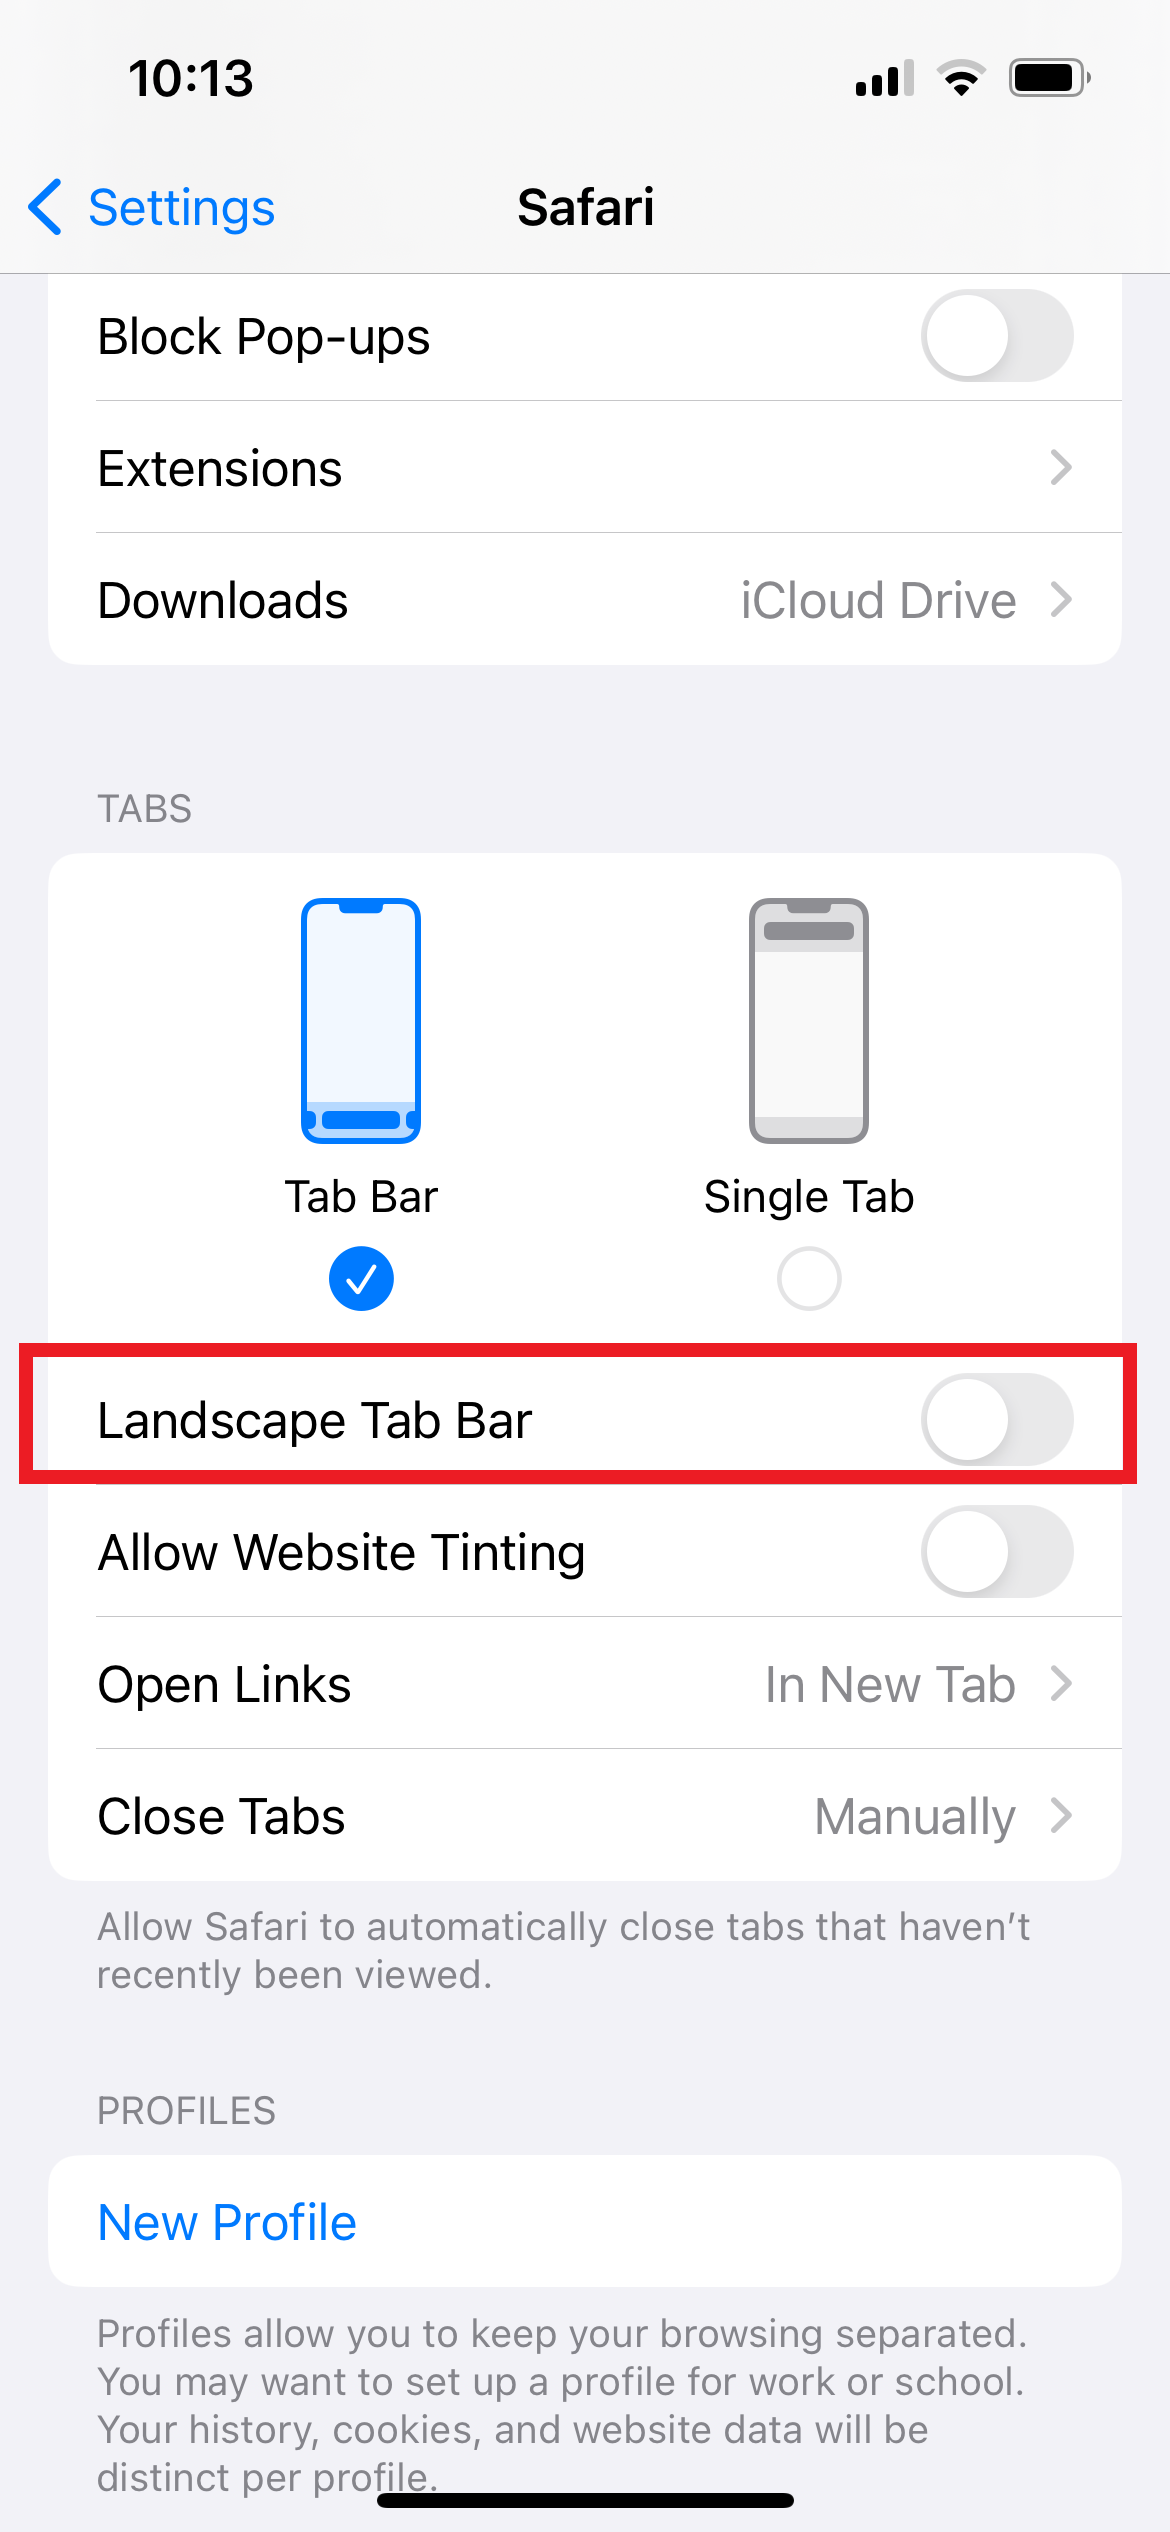 Turn off 'Landscape Tab Bar' in the iPhone settings screen.